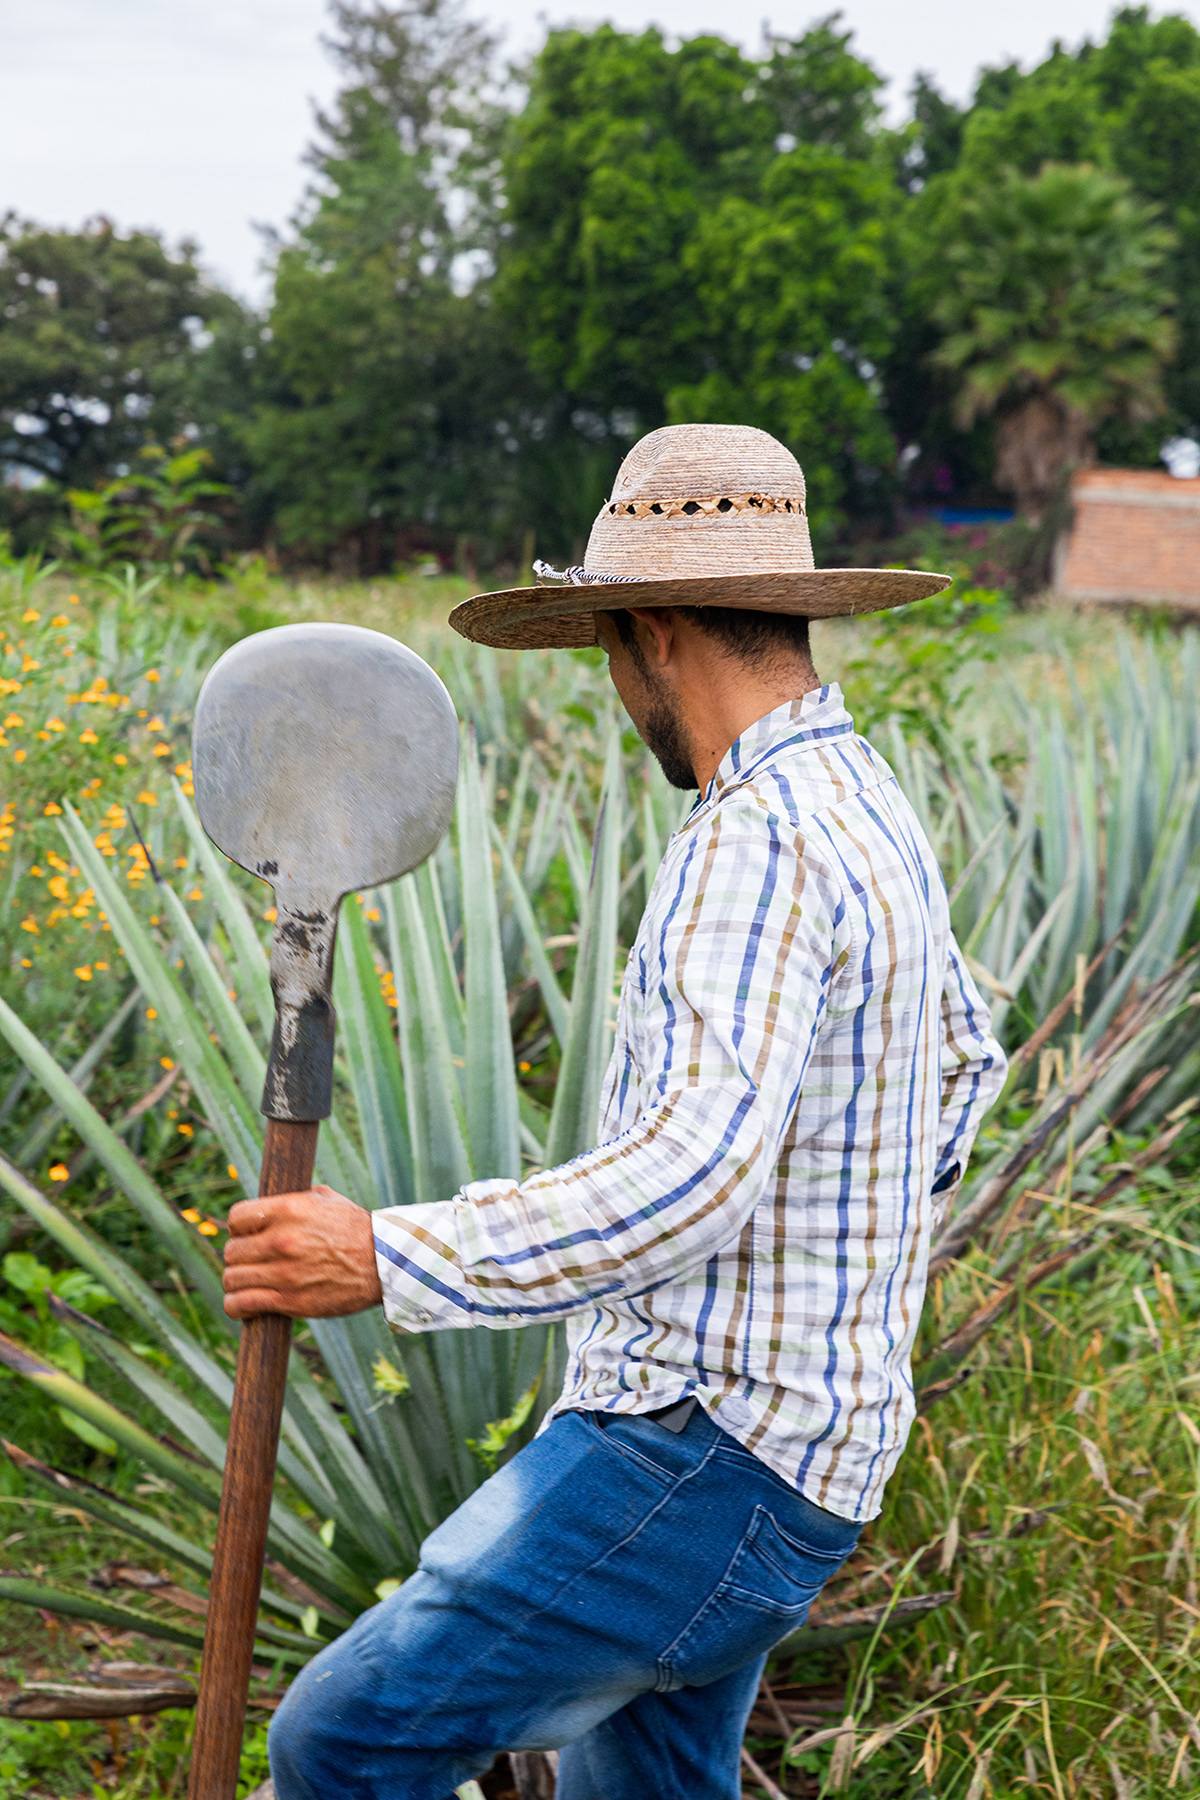 agave alcohol jalisco Jimadores Landscape Maguey mexico Nature Tequila Work 